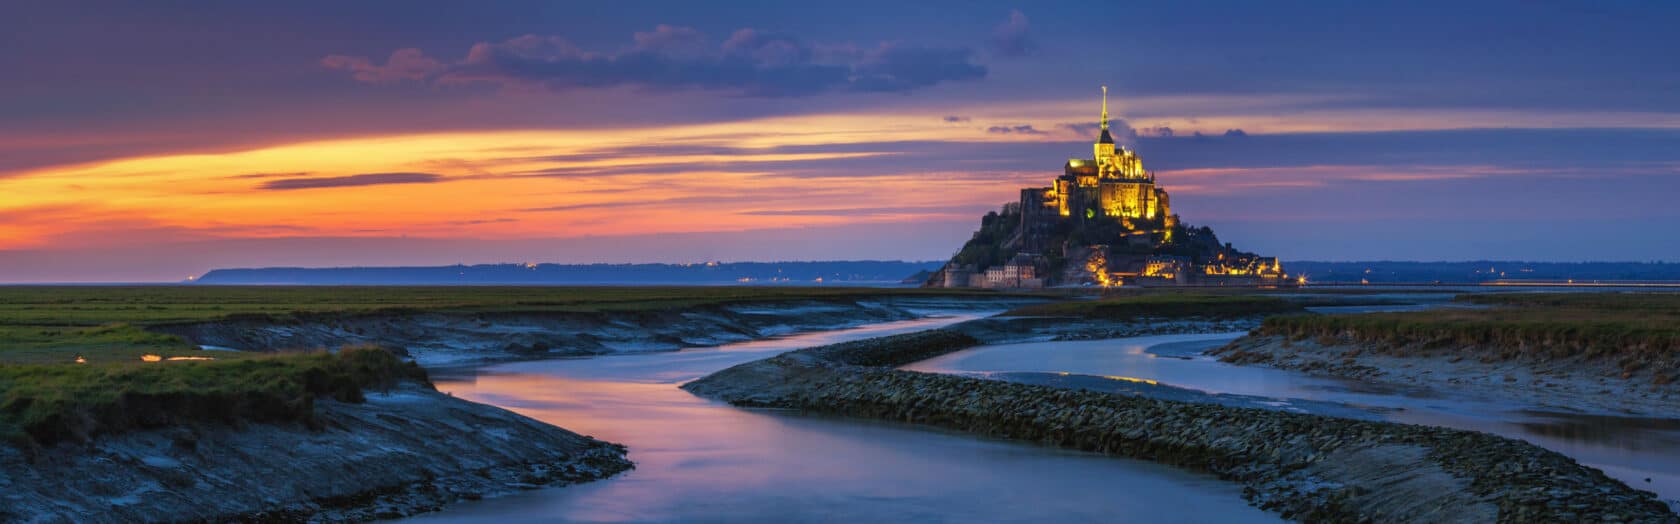 Mont Saint-Michel view in the sunset light.